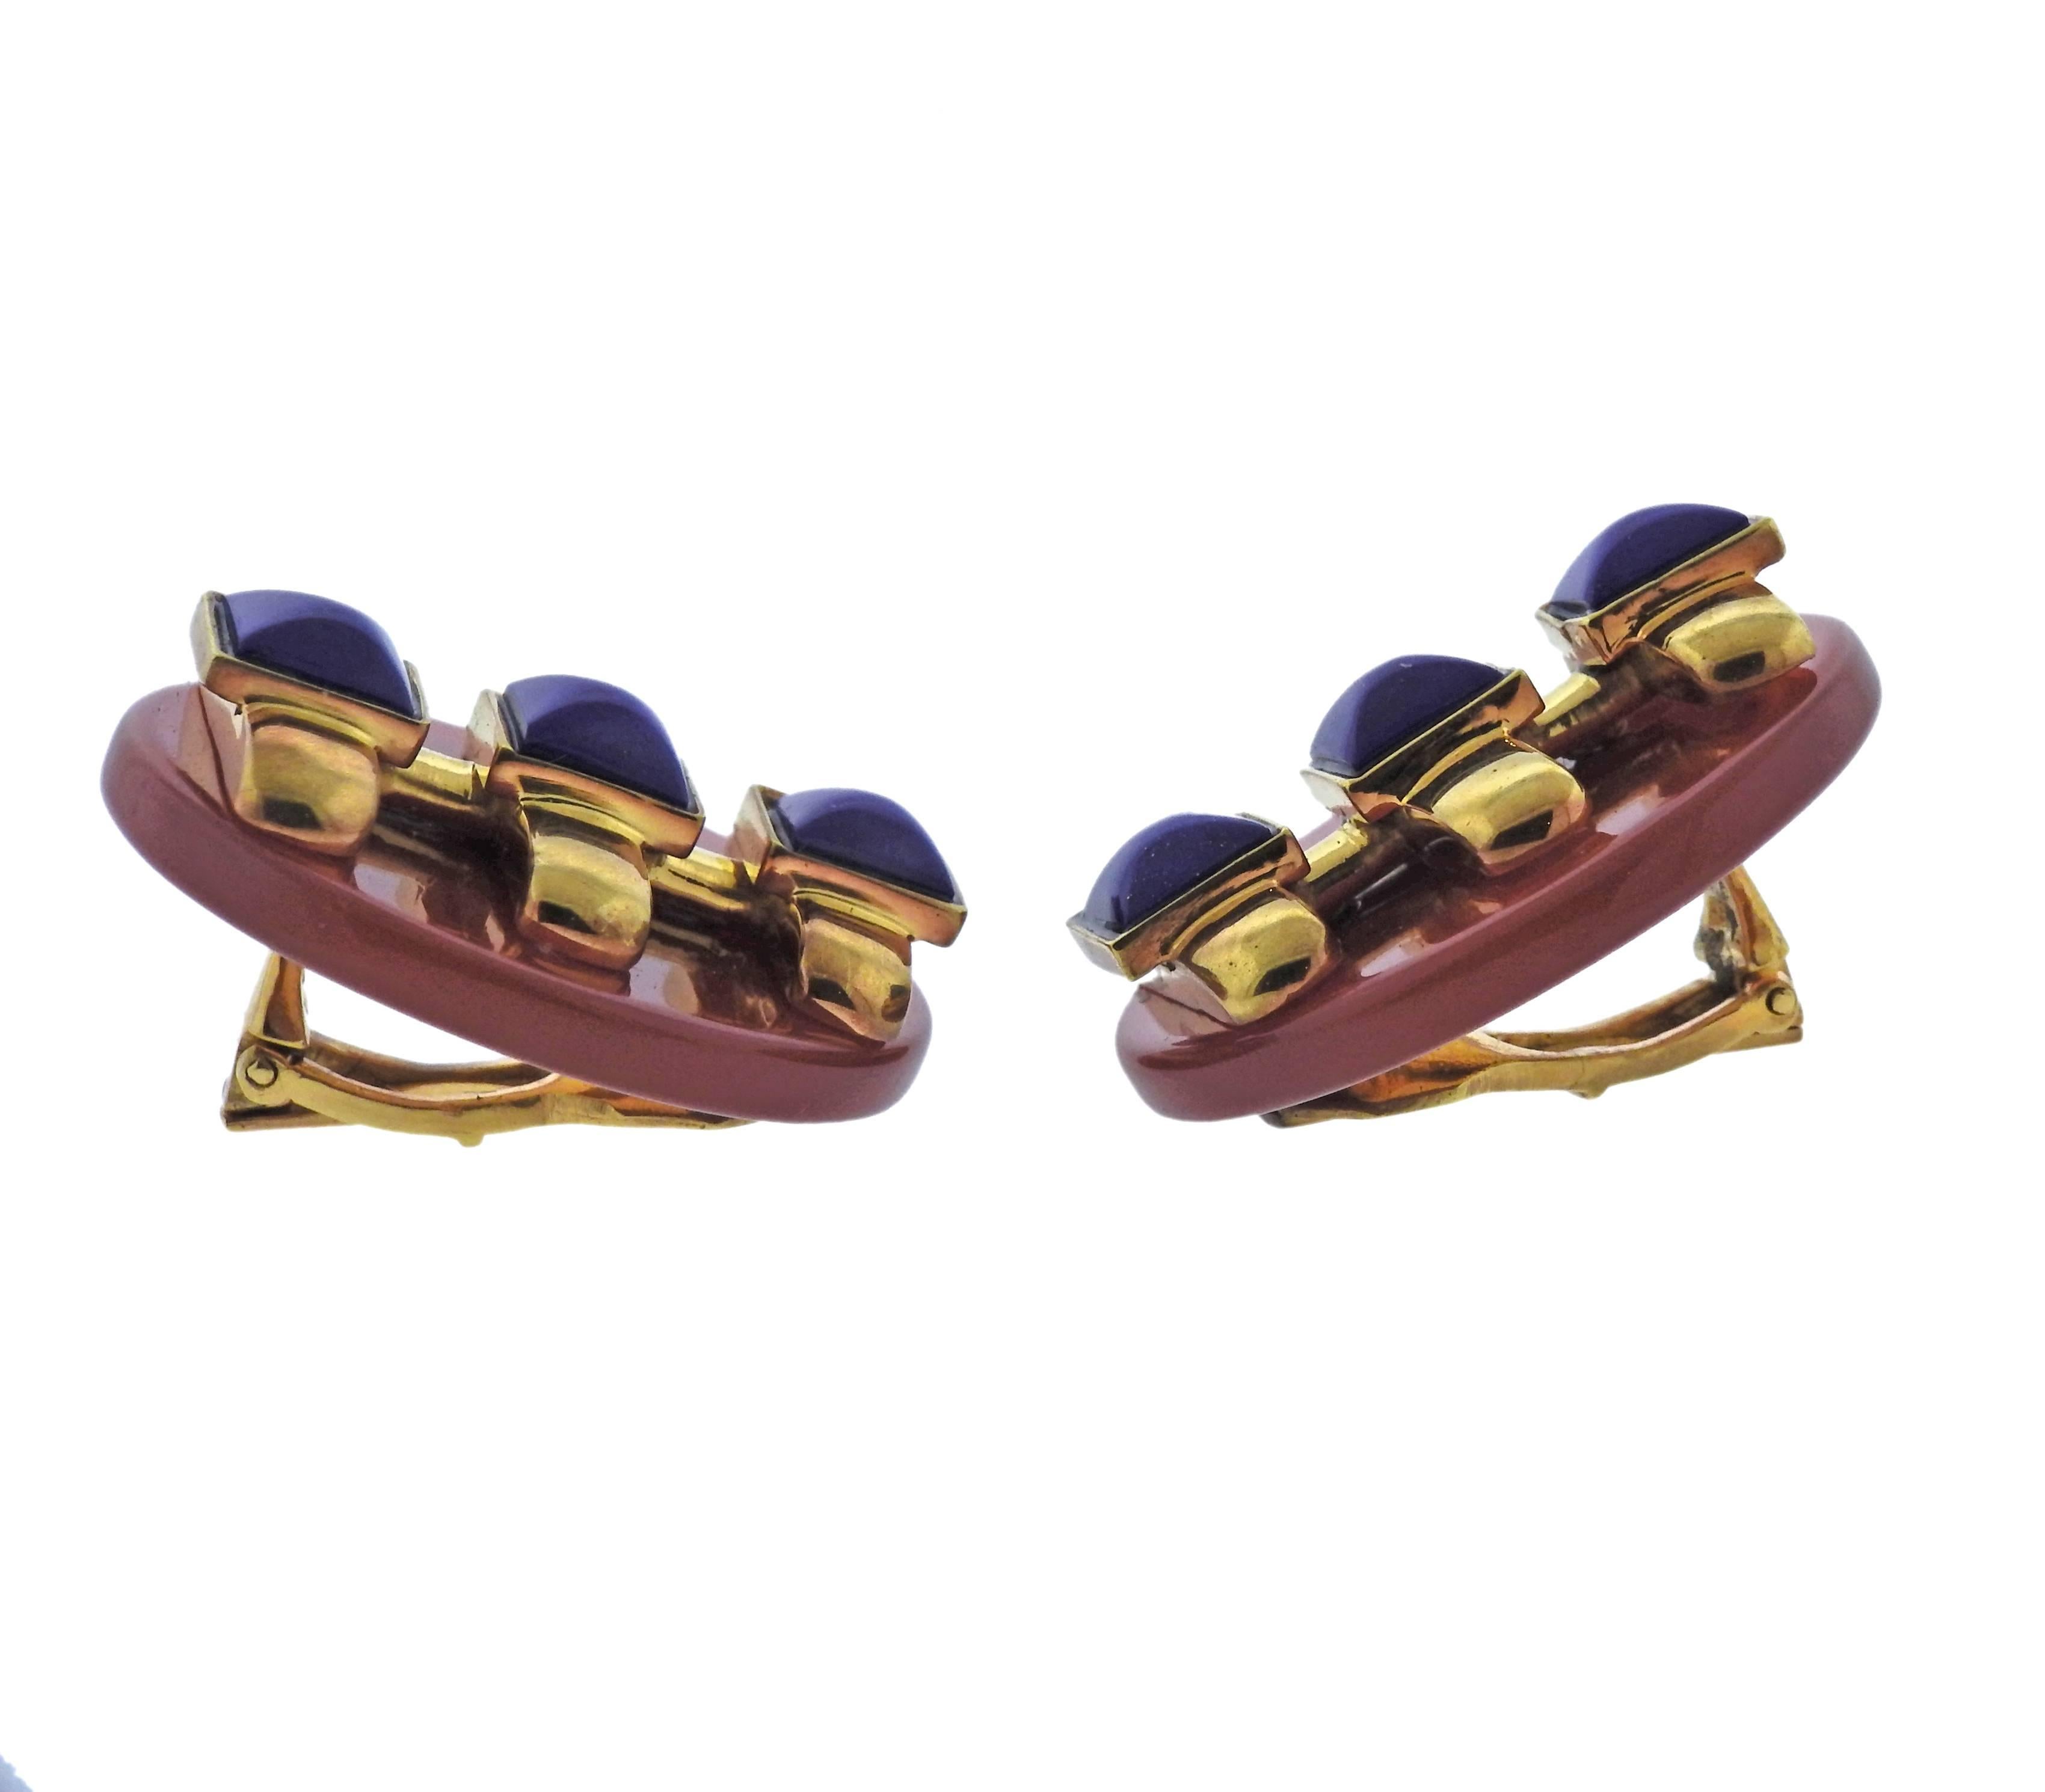 Pair of 18k yellow gold earrings, designed by Aldo Cipullo in circa 1973 , set with carnelian top and lapis lazuli.  Earrings are 28mm in diameter. weighs 34.9 grams. Marked:  A.Cipullo,1973.